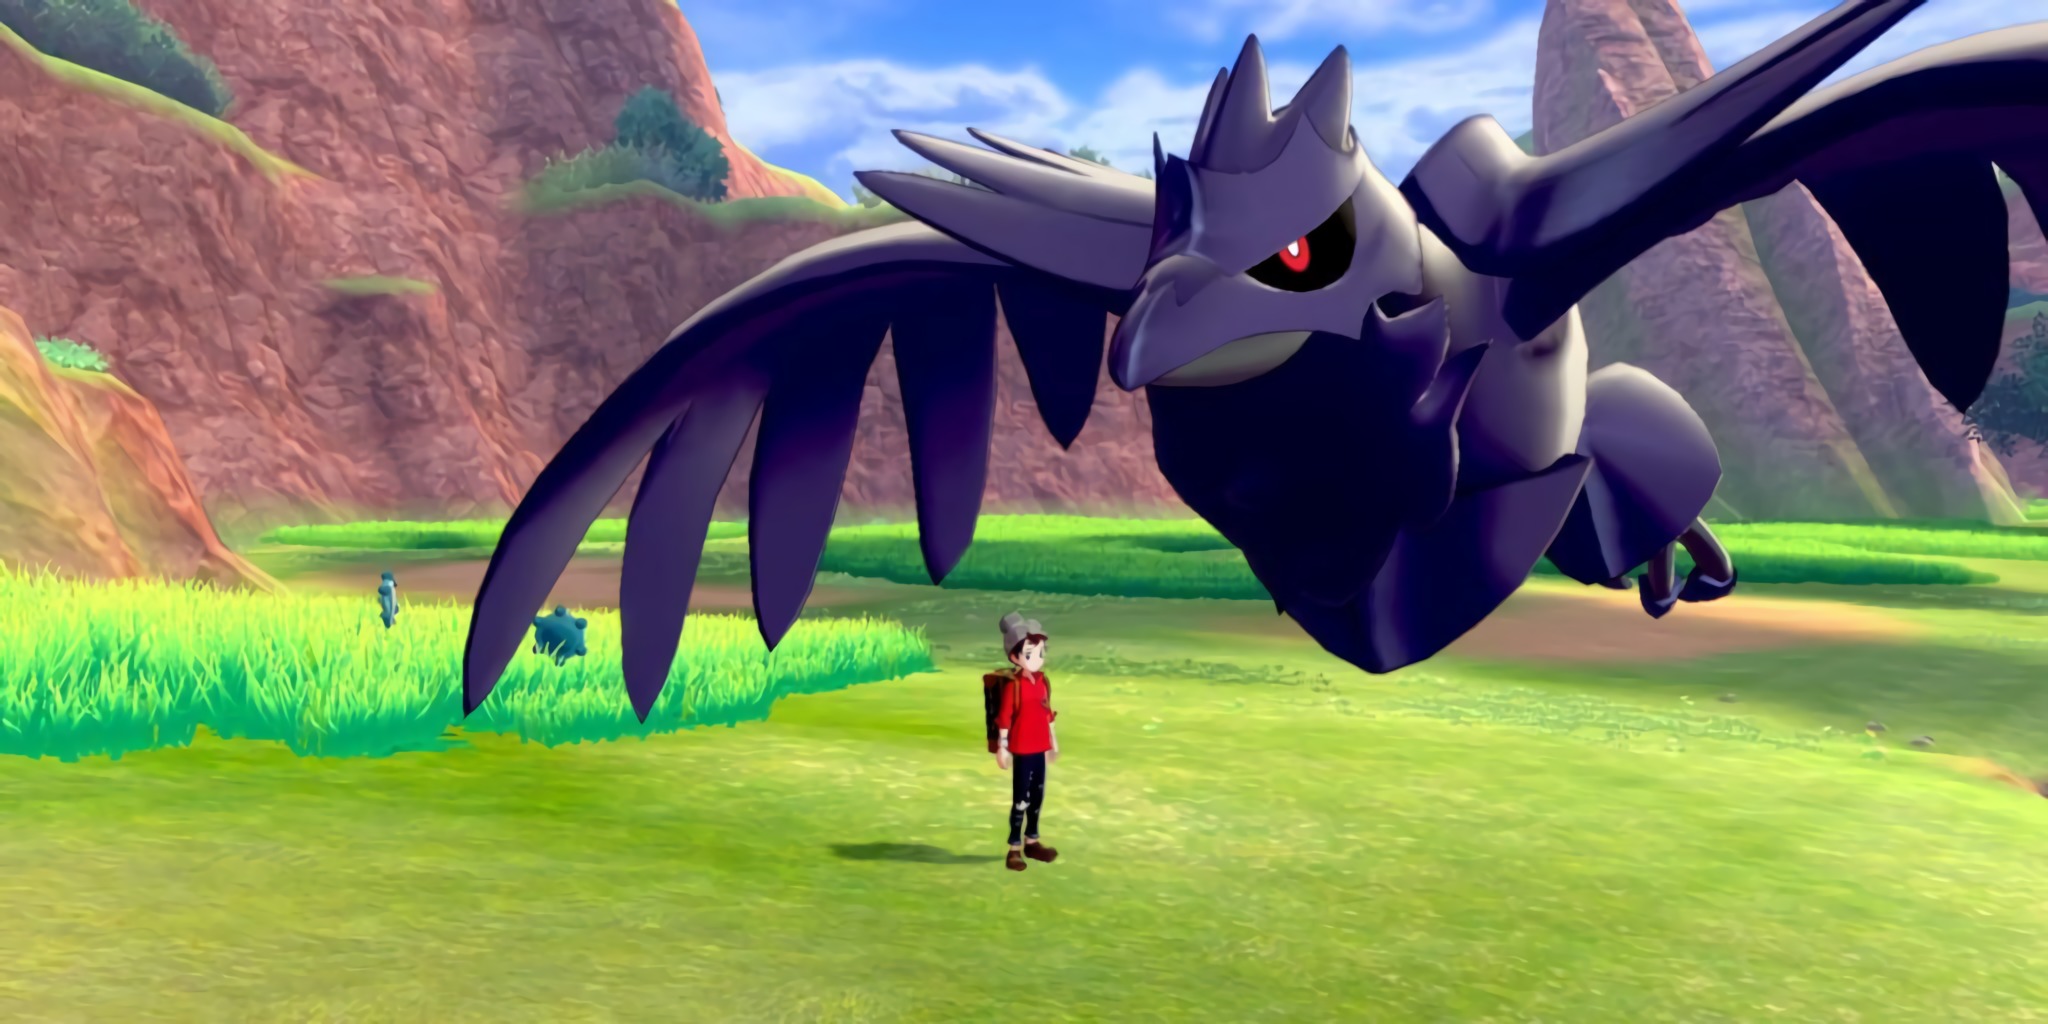 Coolest, most intimidating Pokemon in Sword and Shield so far? Corviknight